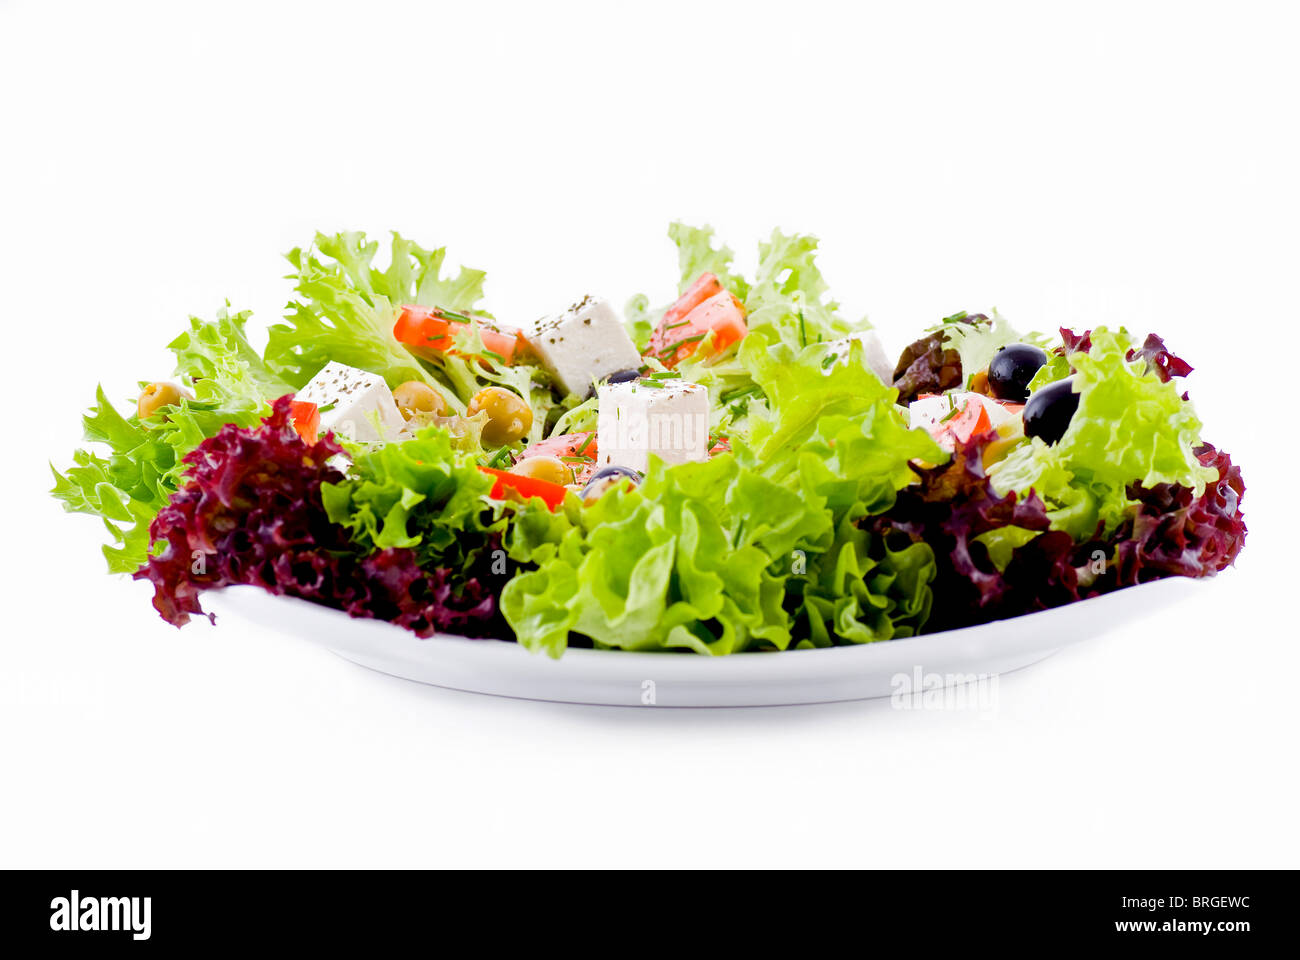 Plate of fresh vegetables - salad, olives, tomato, feta and herbs Stock Photo